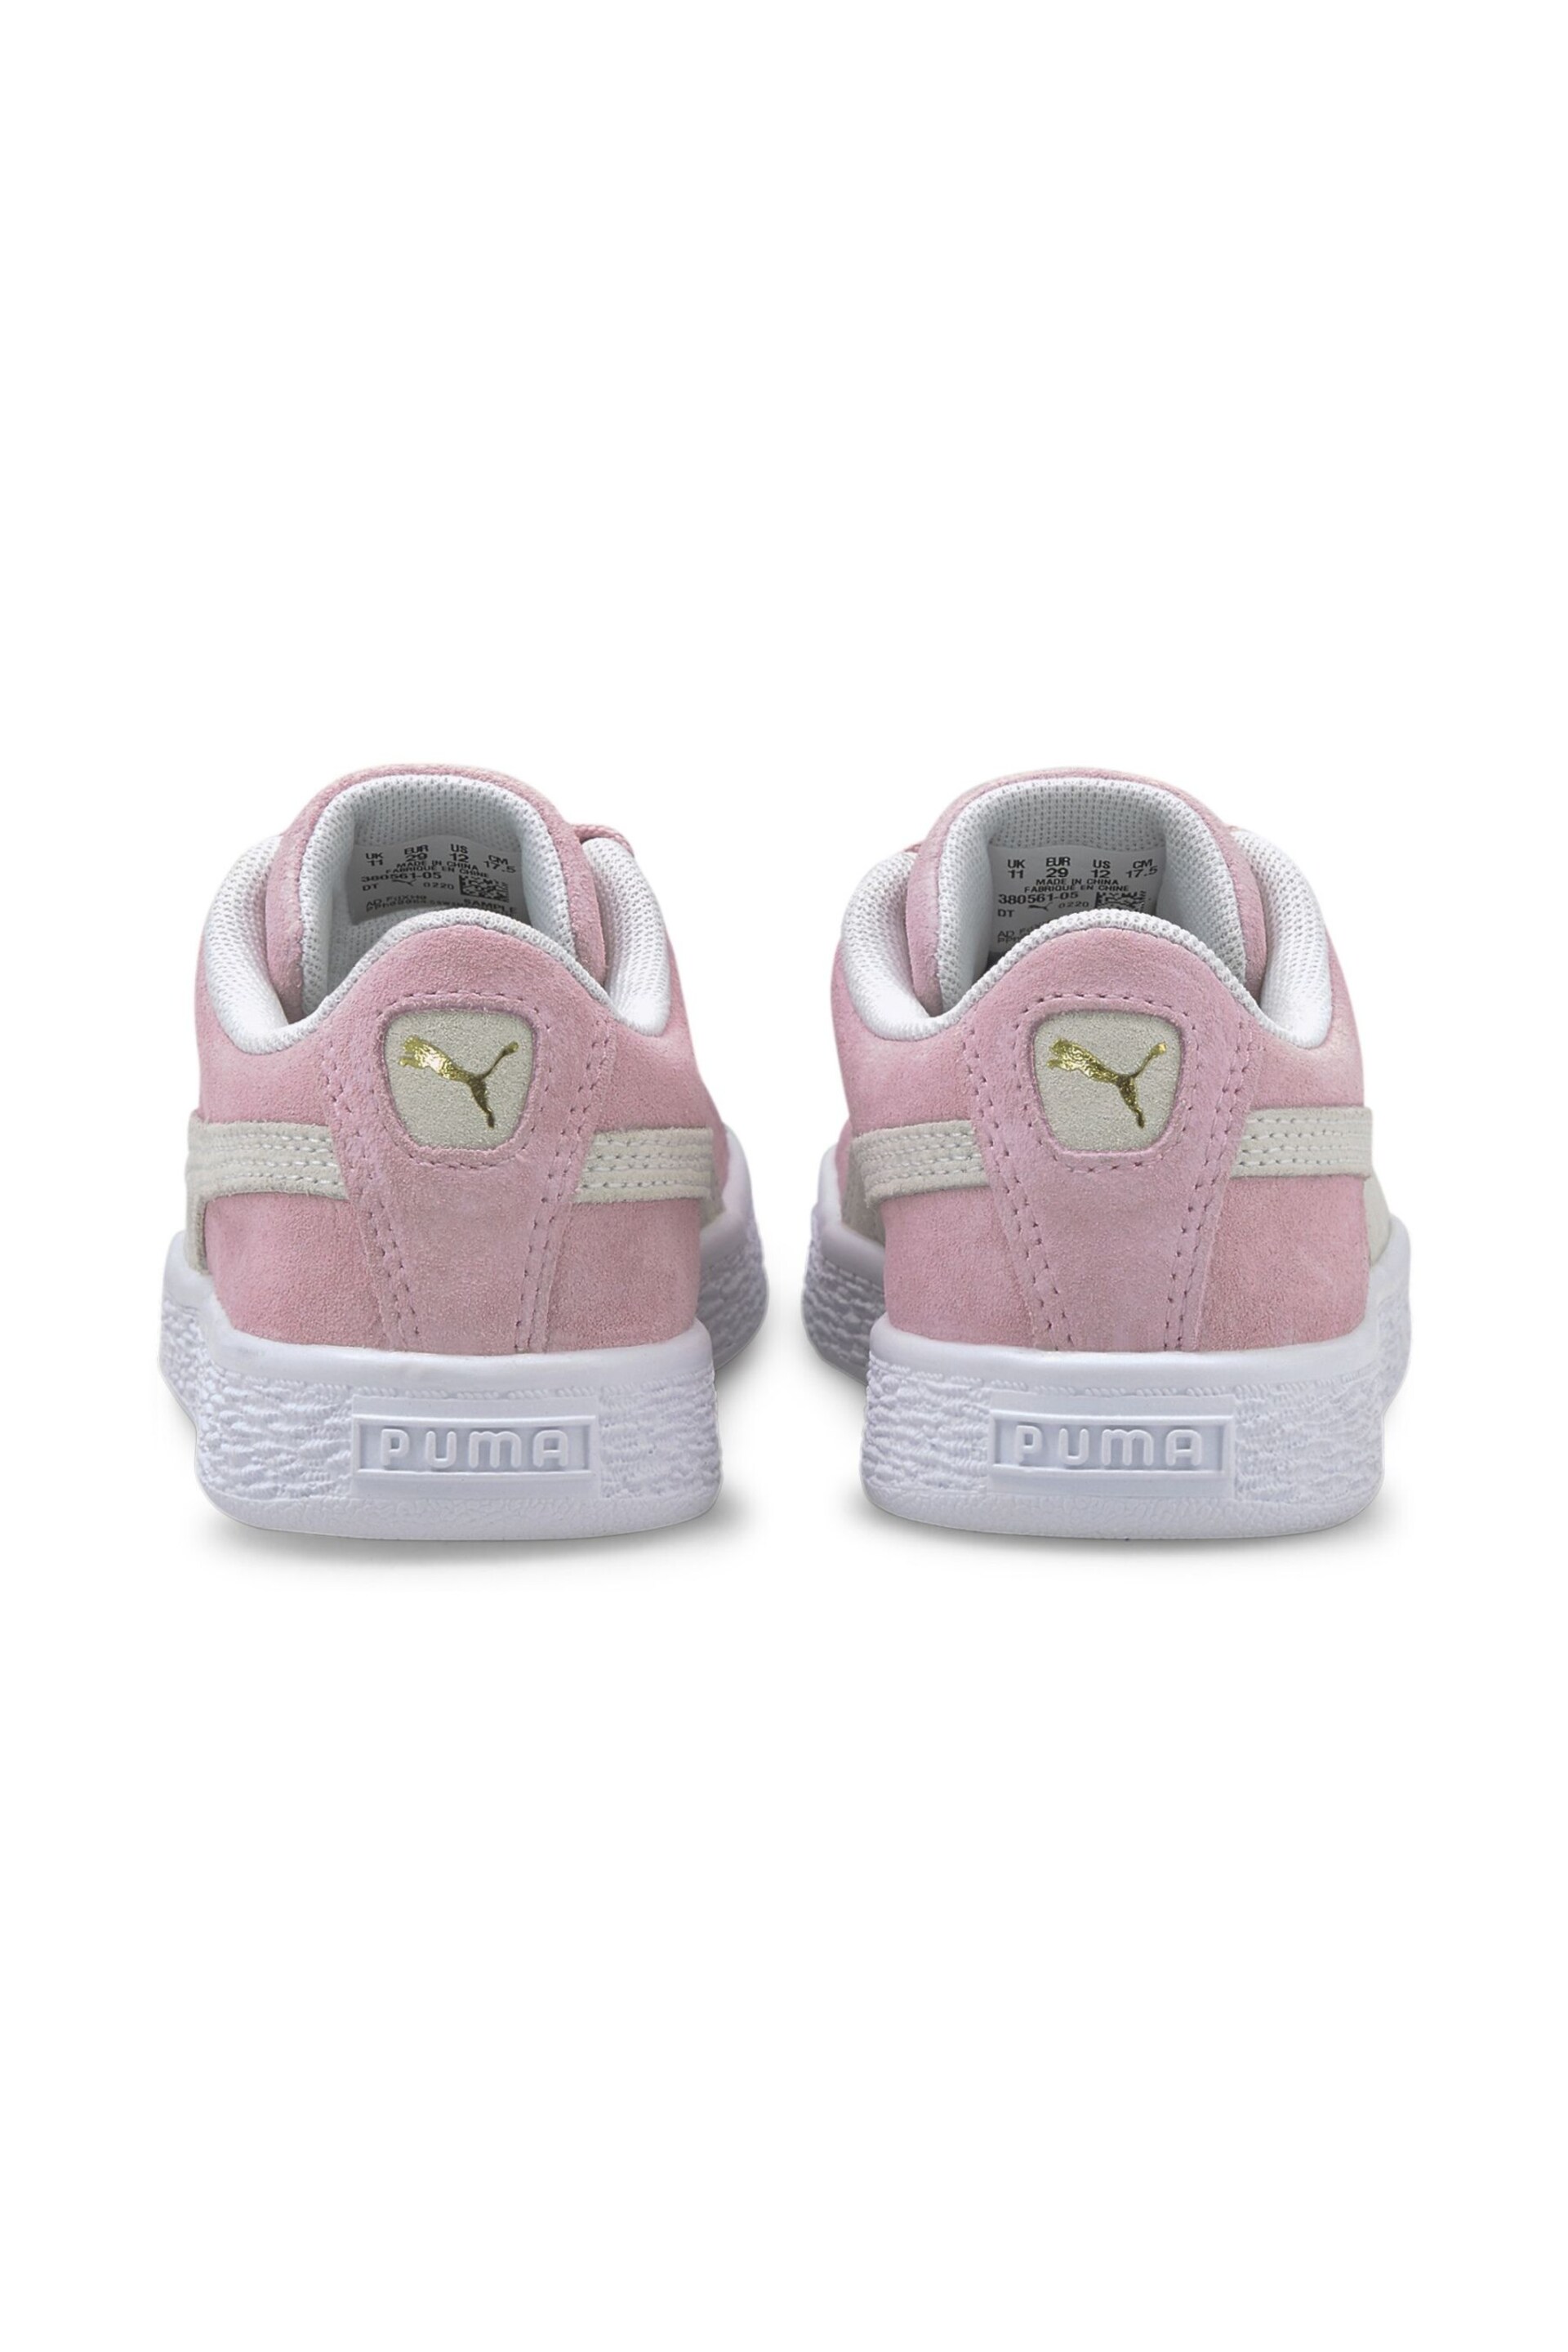 Puma Pink Suede Classic XXI Kids Trainers - Image 4 of 6